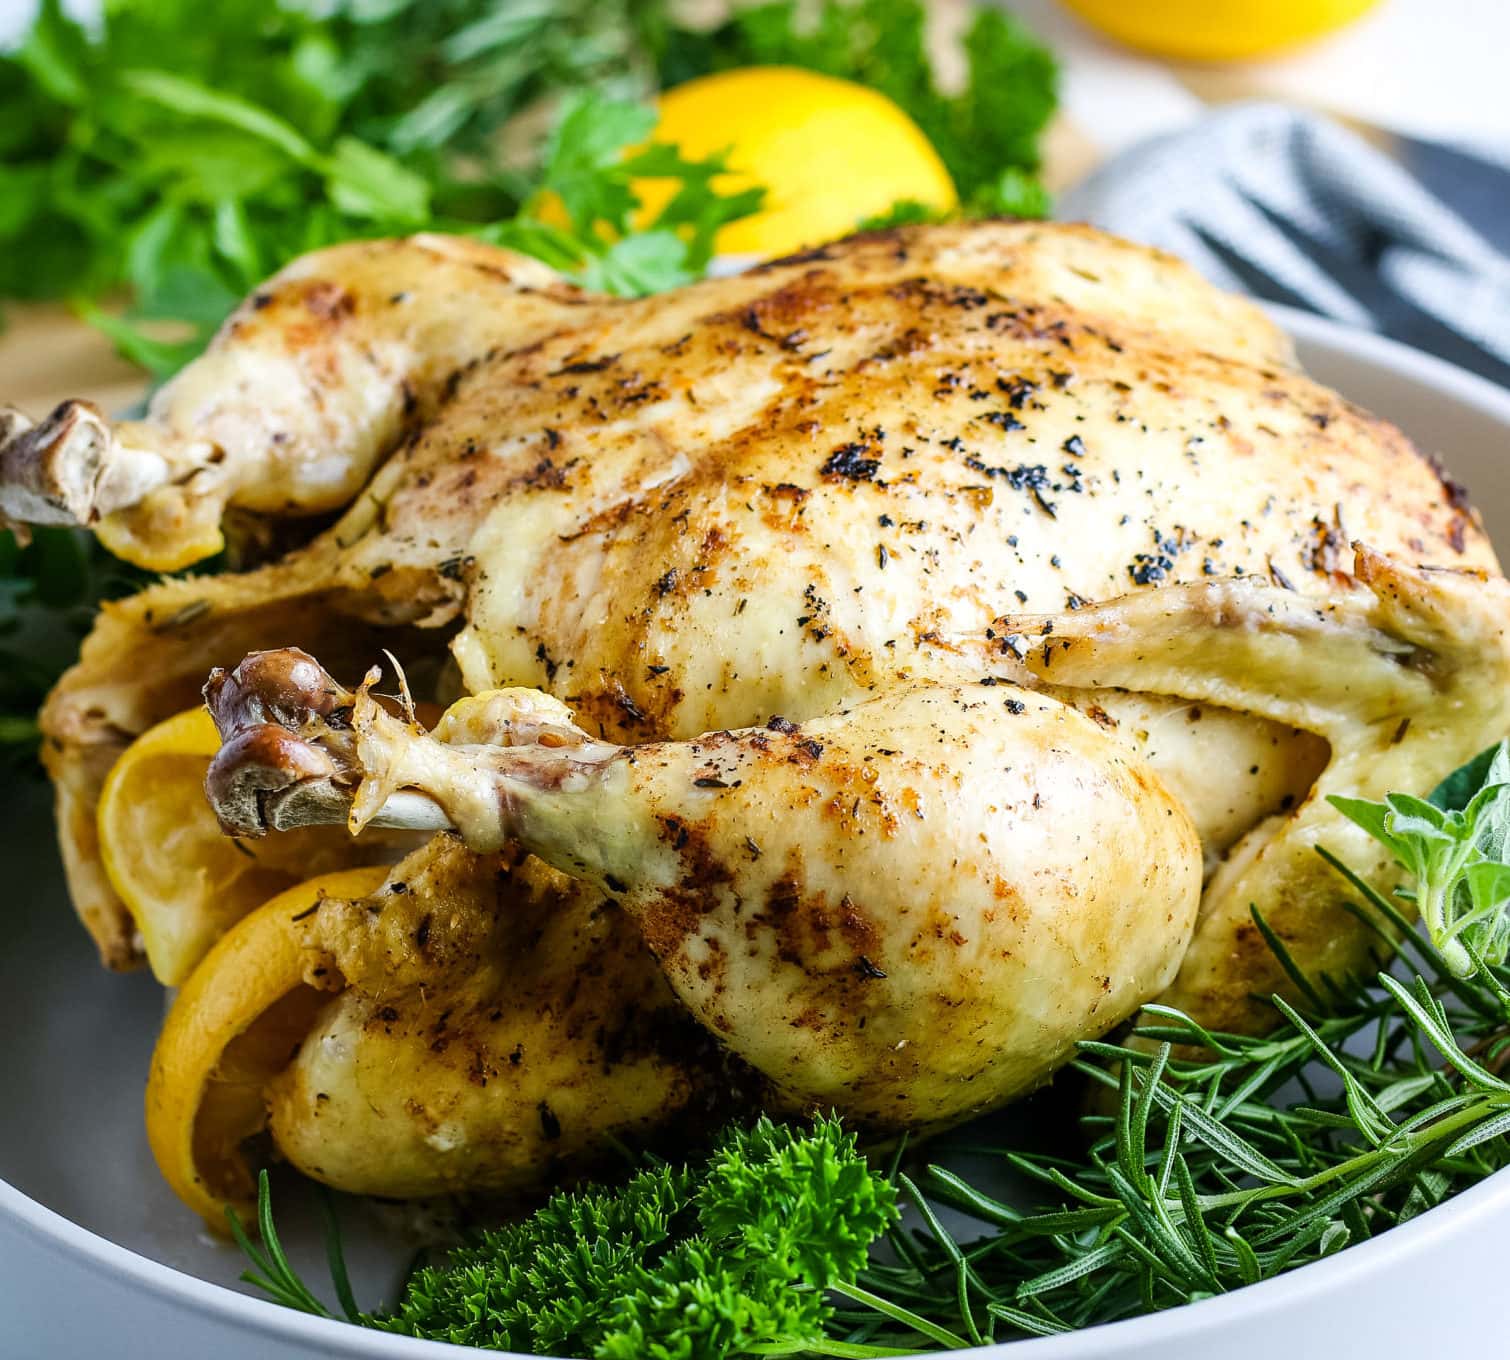 https://www.mommyhatescooking.com/wp-content/uploads/2020/06/IP-Whole-Chicken-set-2-Final-H-scaled-e1593454408484.jpg